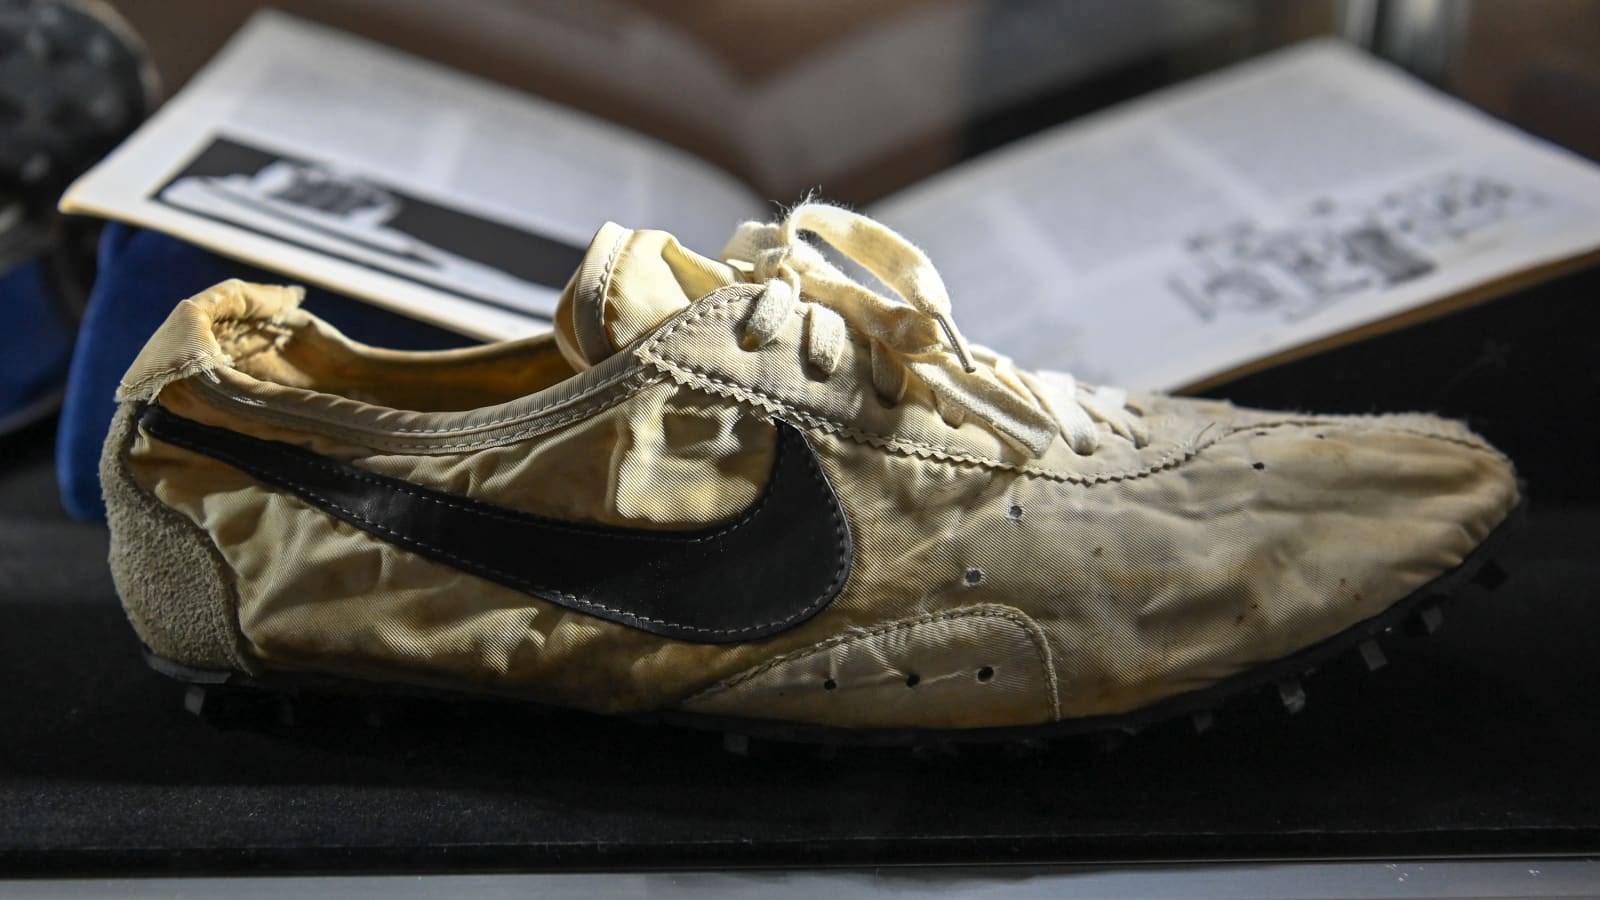 The World's Most Expensive Sneakers Sold for $437,500 –